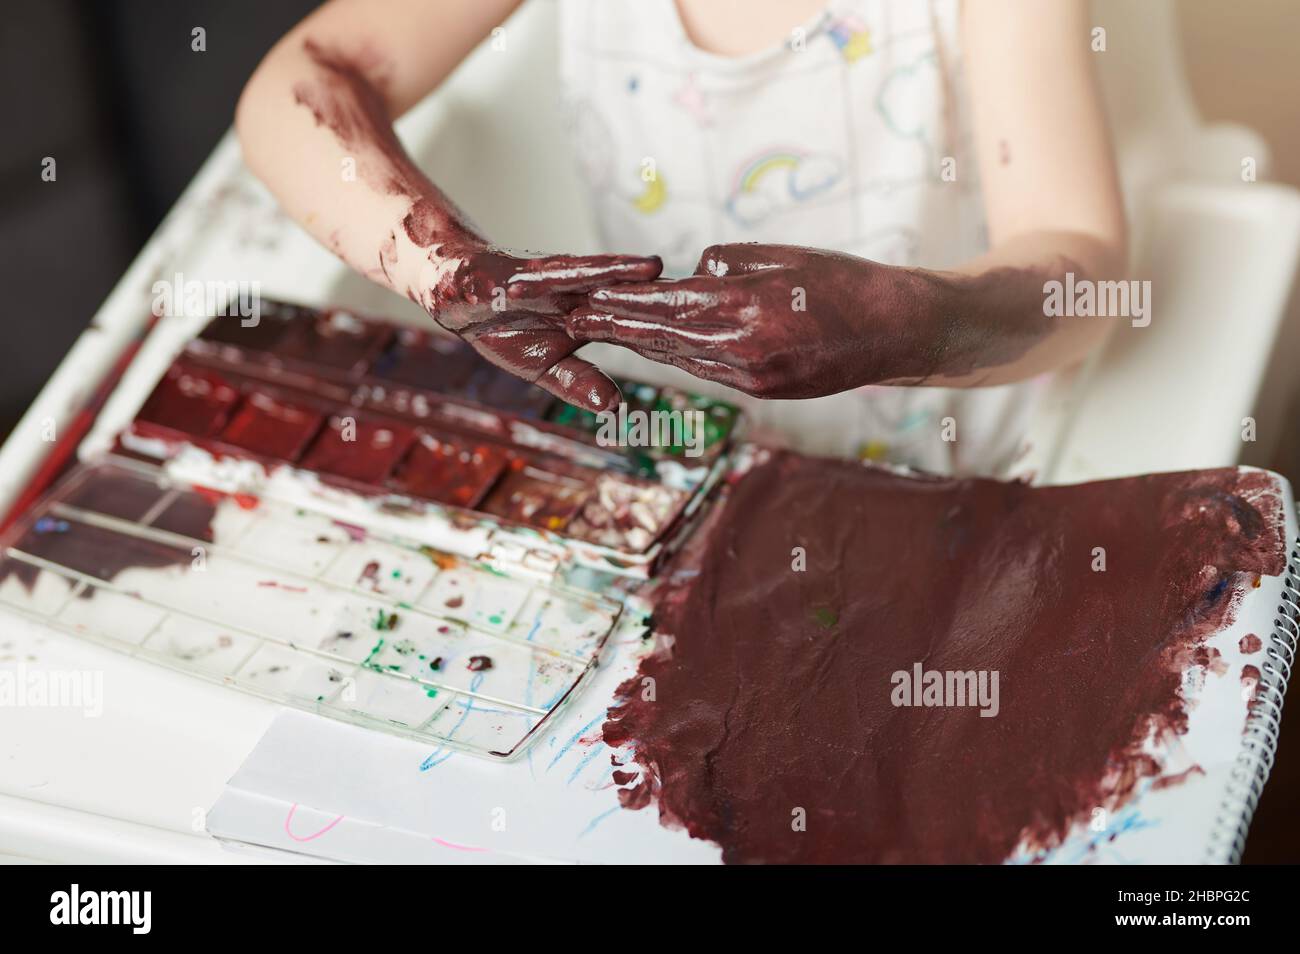 Child play mess with paint making big stain on paper and hands Stock Photo